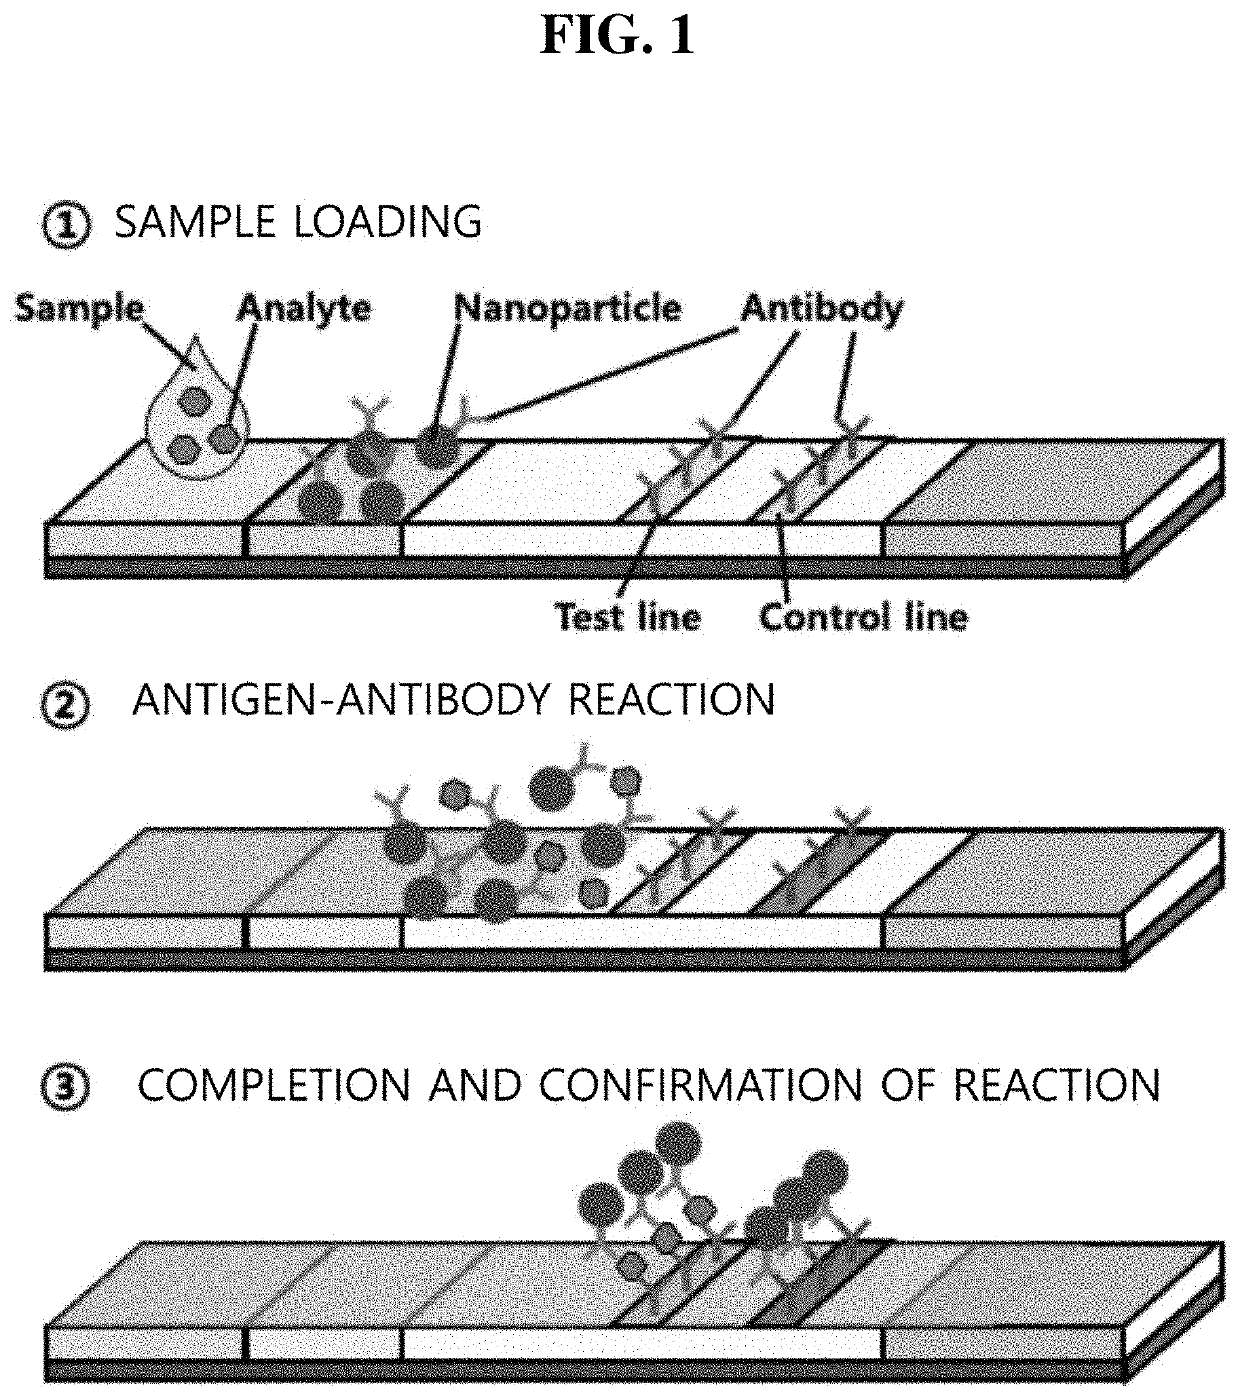 Conjugate for immunodetection based on lateral flow assay, and immunodetection method using same